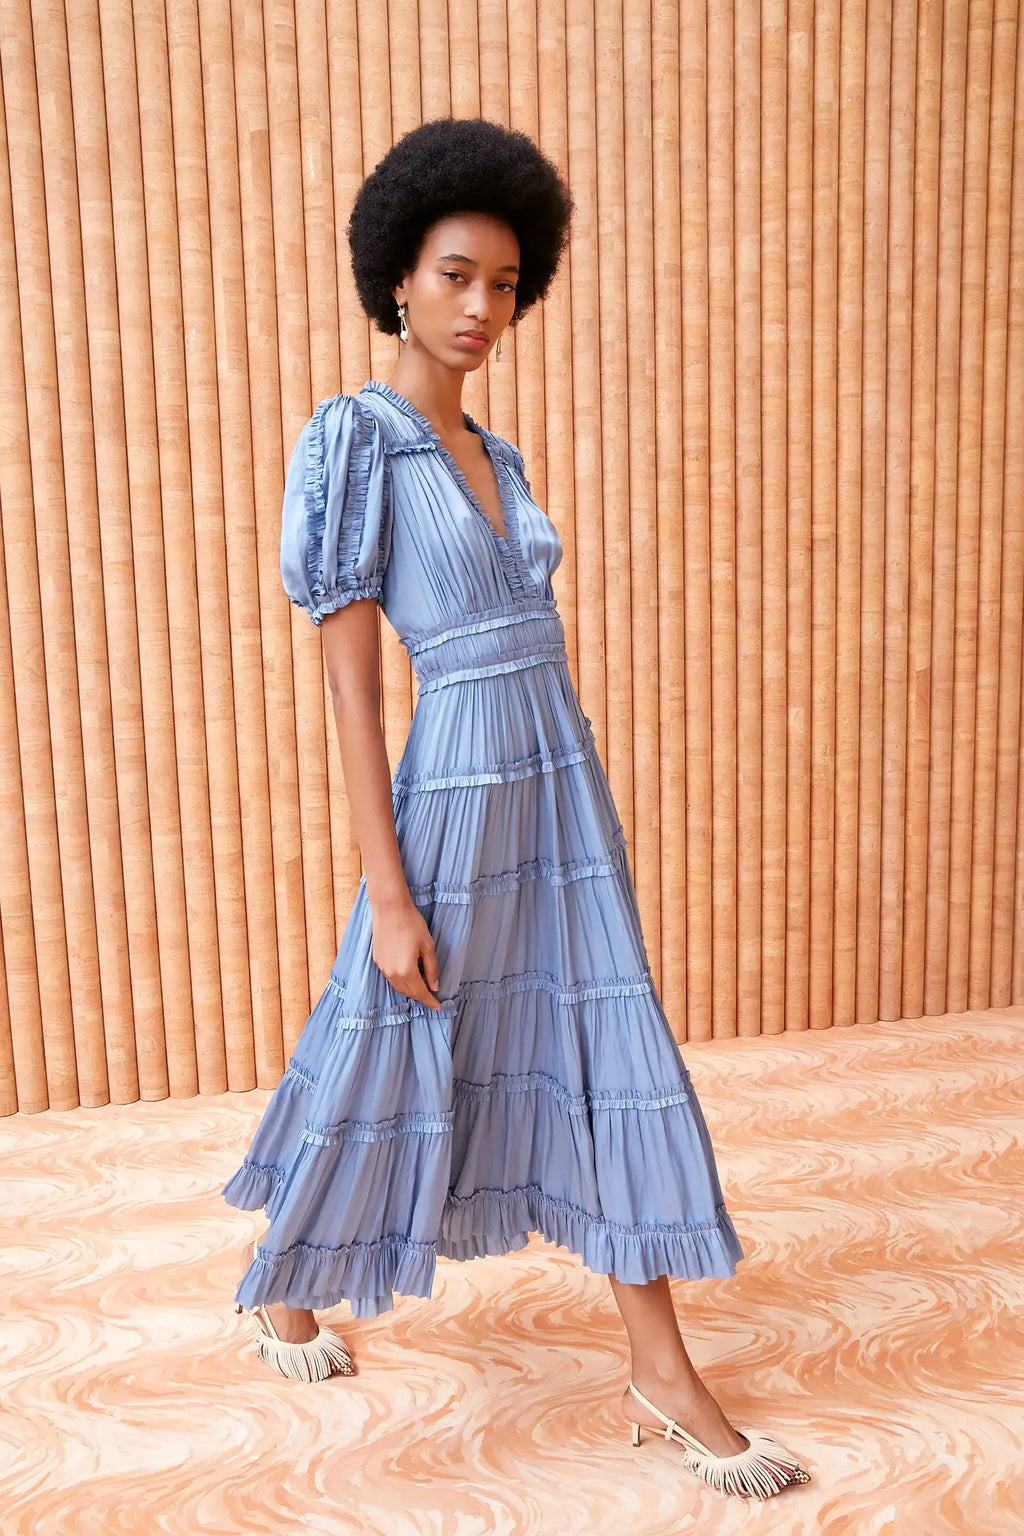 Discover the elegant style of the Rose Dress. Handmade with high-end designer details, this long blue dress exudes sophistication and luxury. Elevate your wardrobe and make a statement with this one-of-a-kind piece.